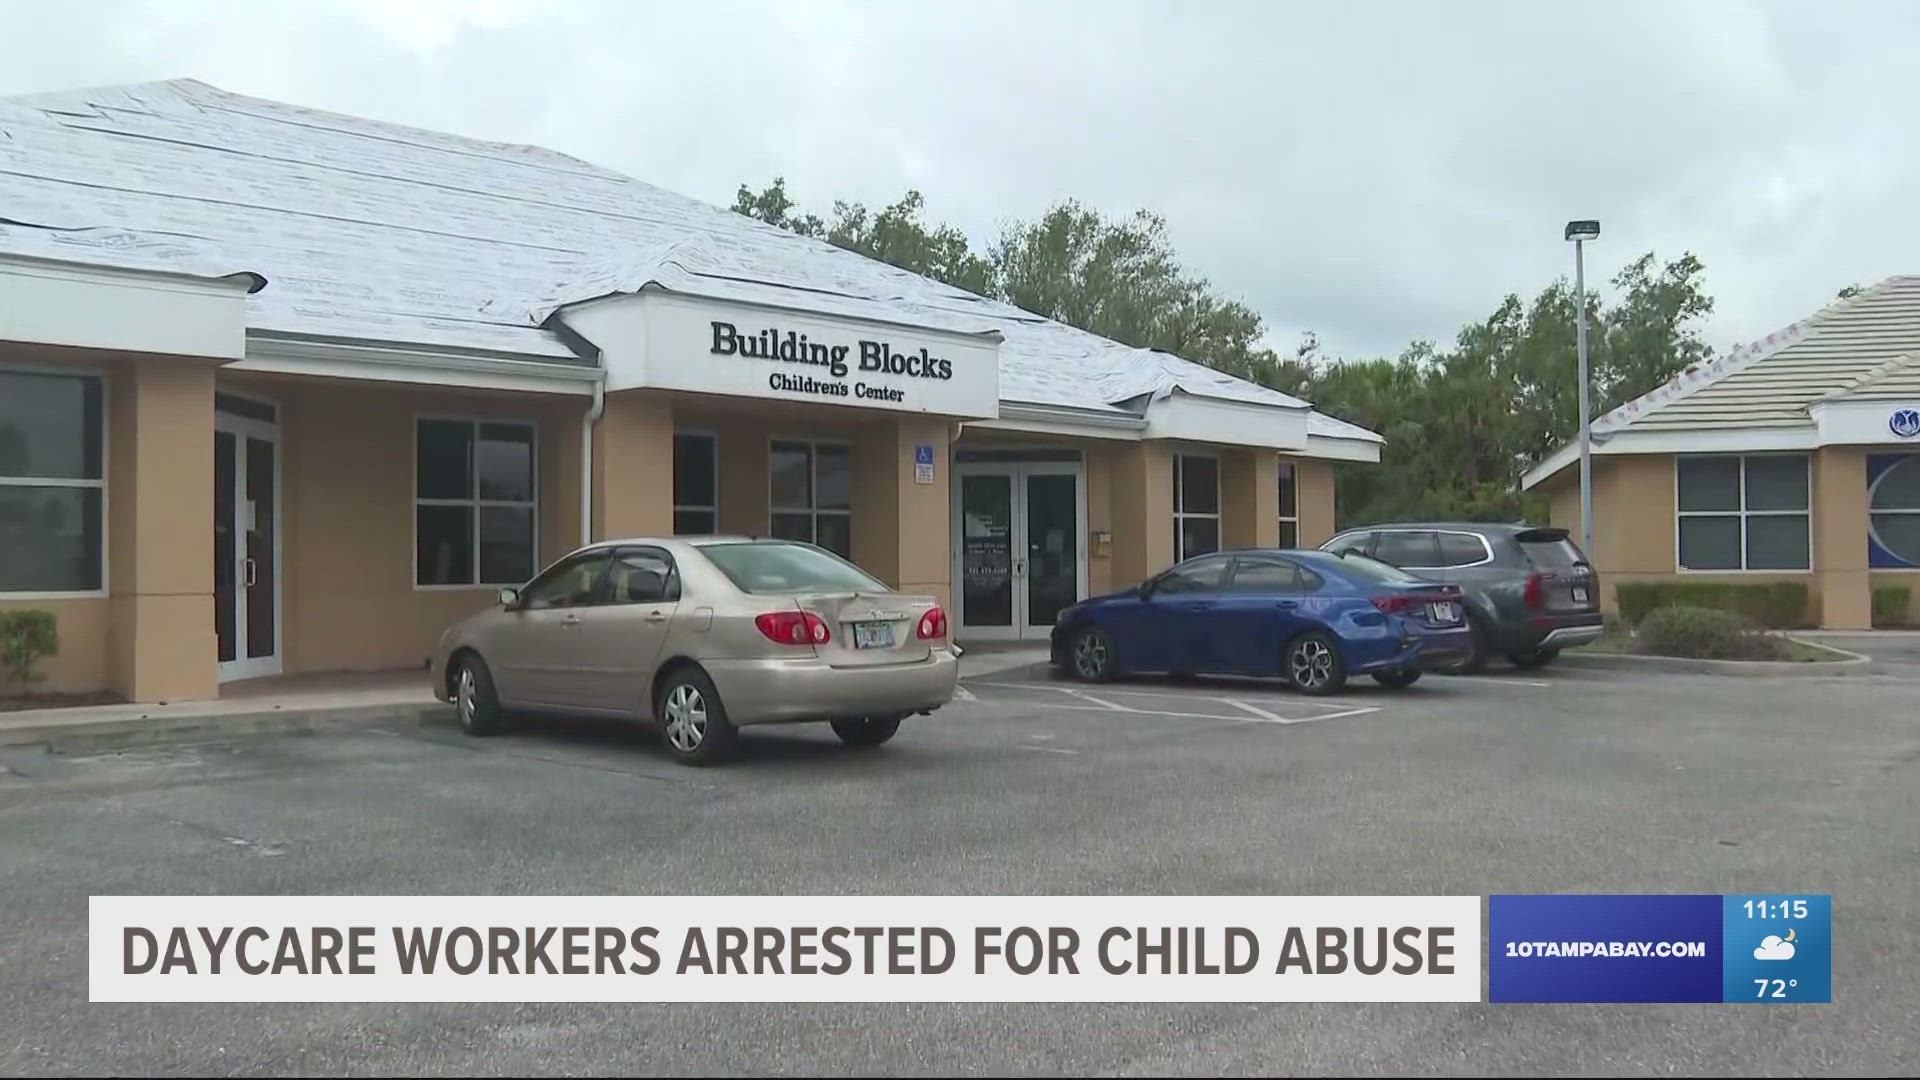 Both the Florida Department of Children and Families and the Florida Department of Health are continuing to look into the center.